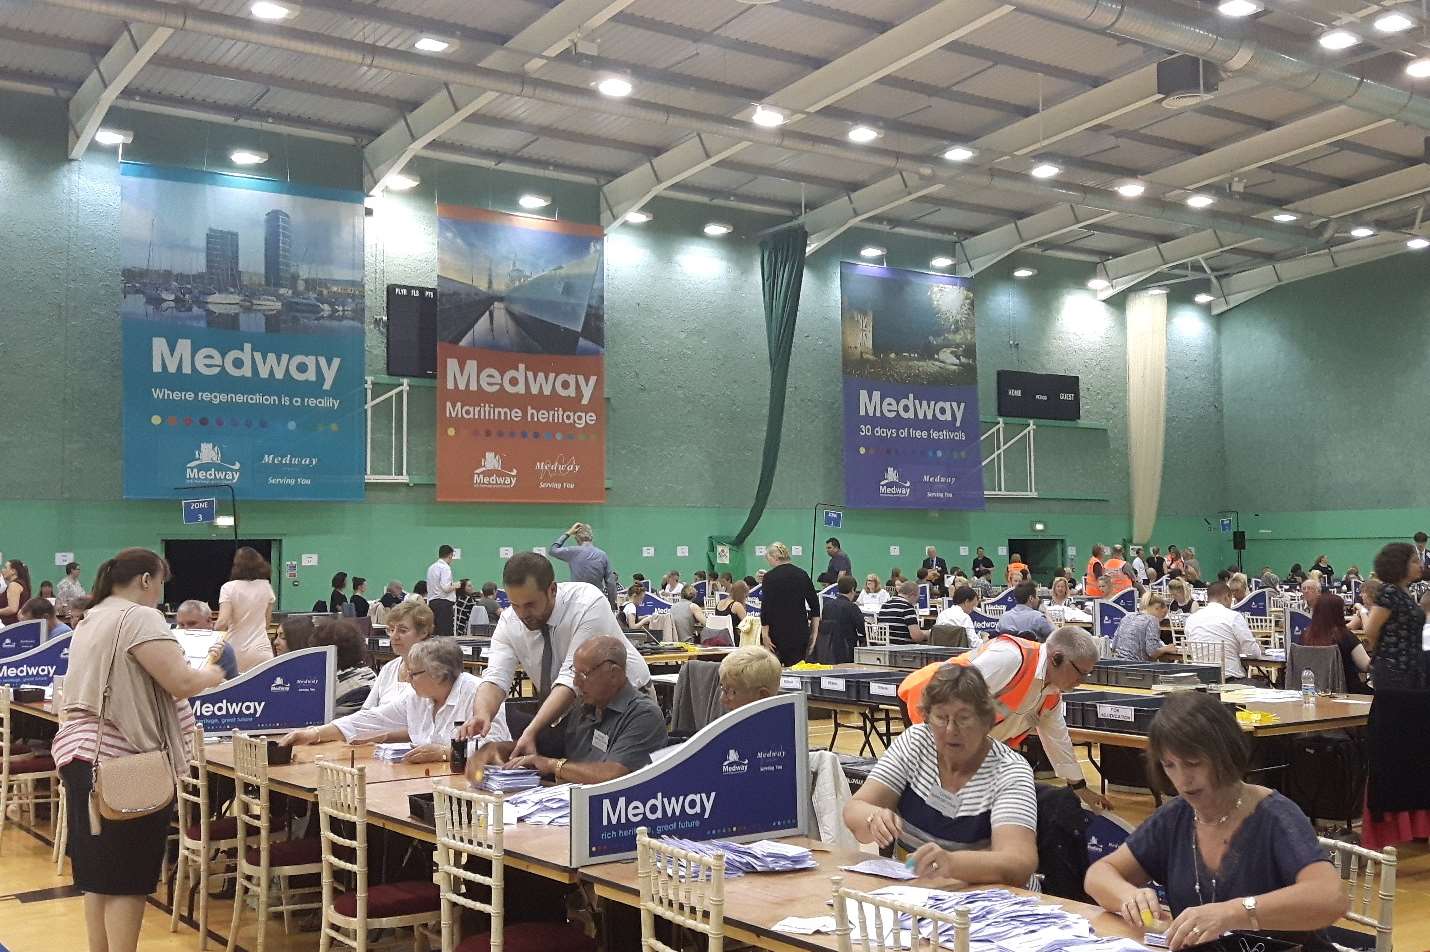 The count at Medway Park